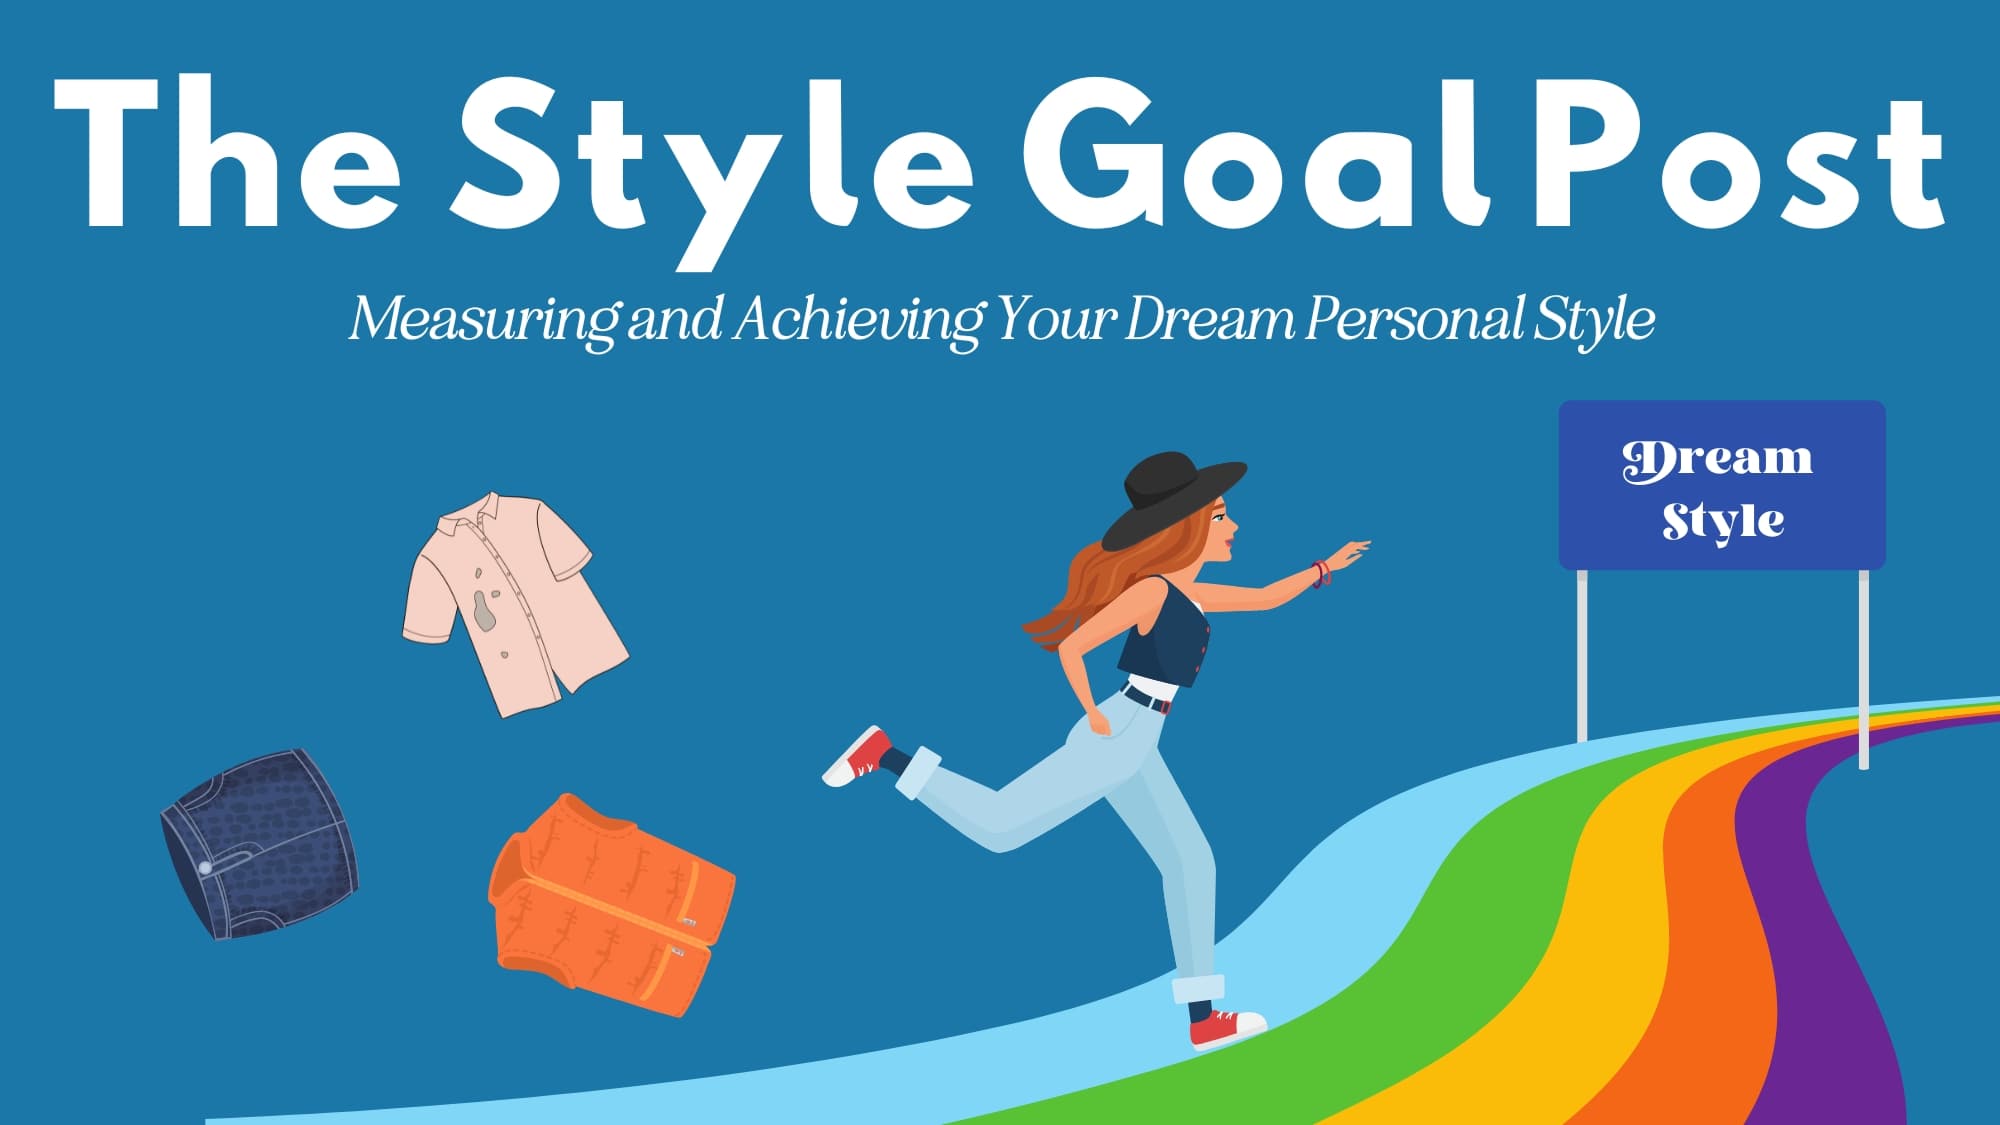 Style Goals: Measuring and Achieving Your Dream Personal Style